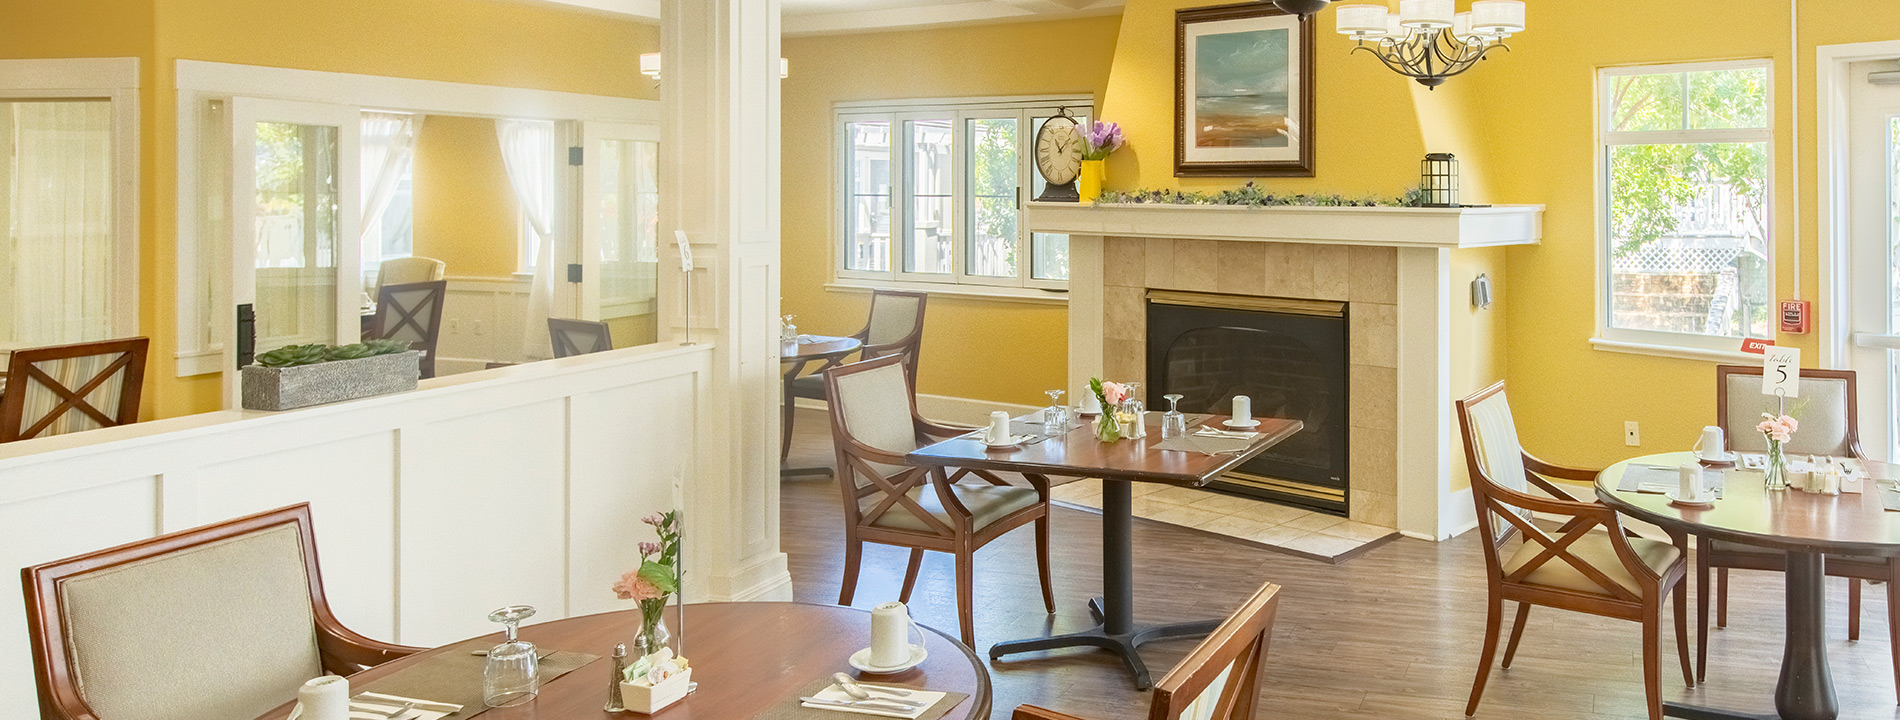 A bright sunny dining room with tables set for breakfast.